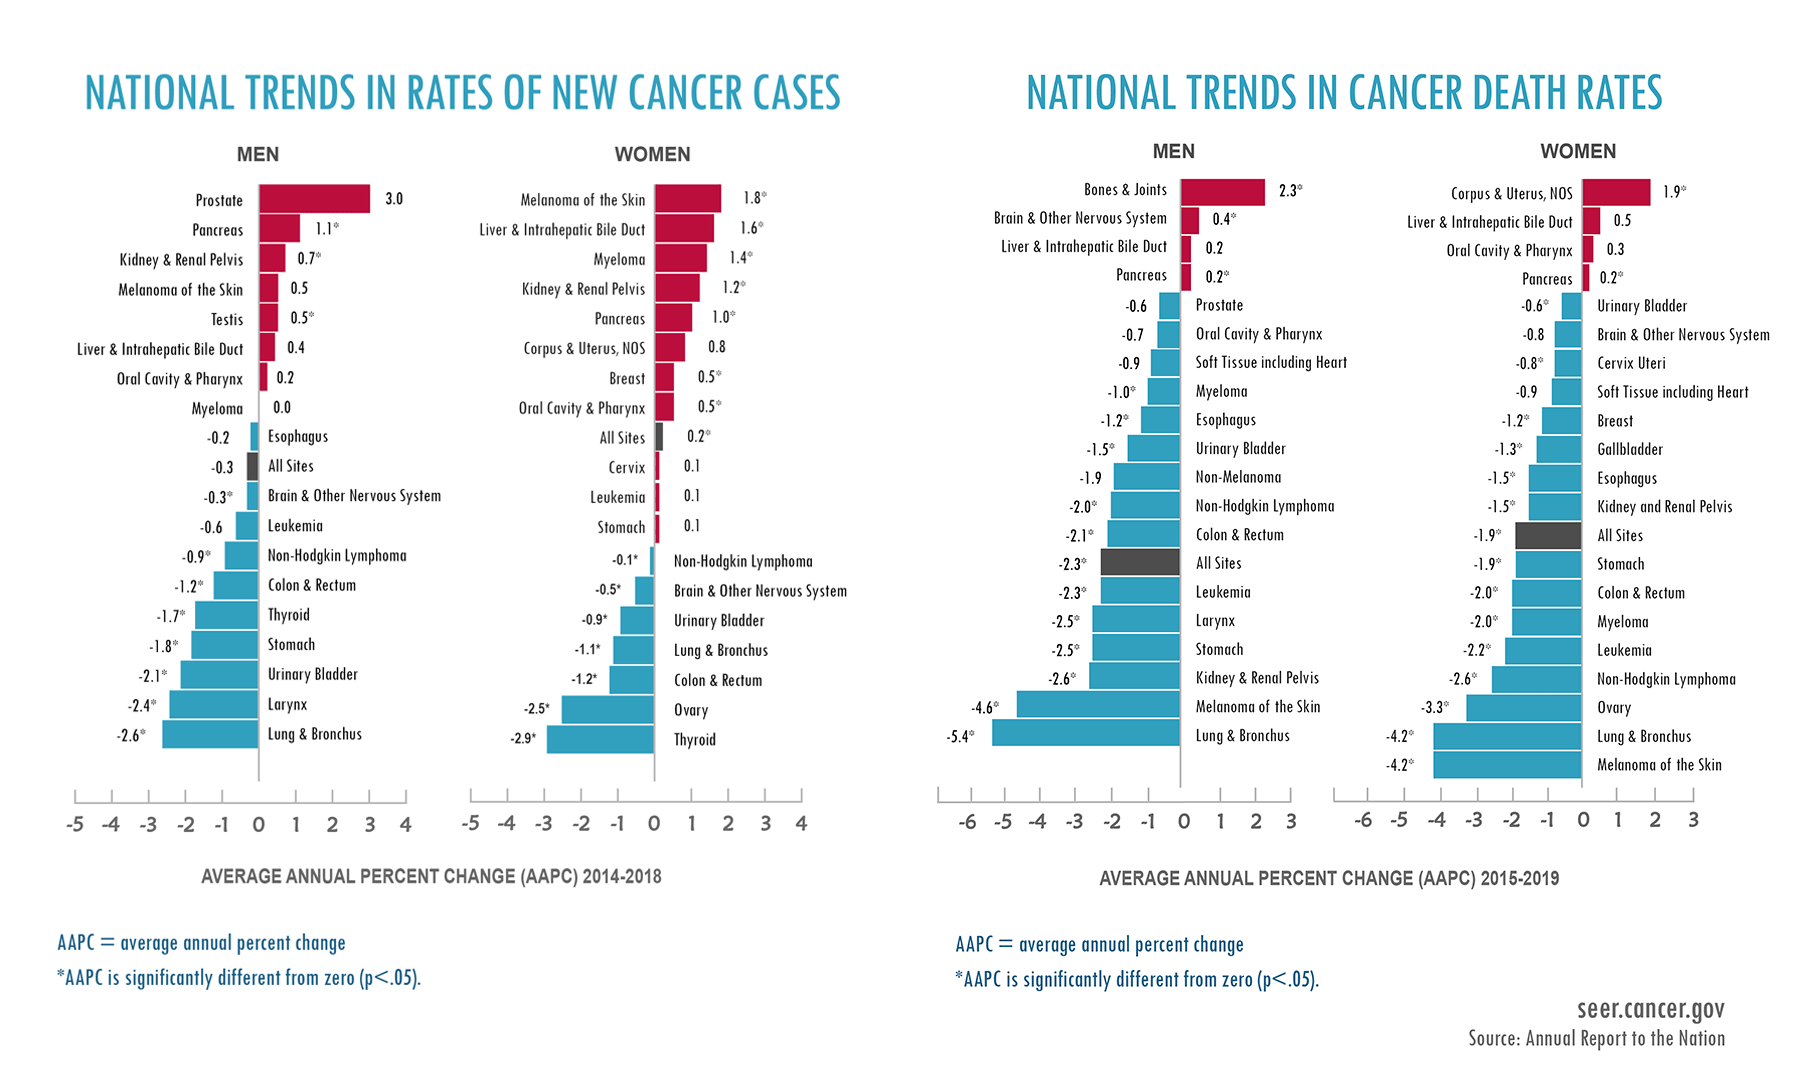 National Trends in rates of new cancer cases and national trends in cancer death rates